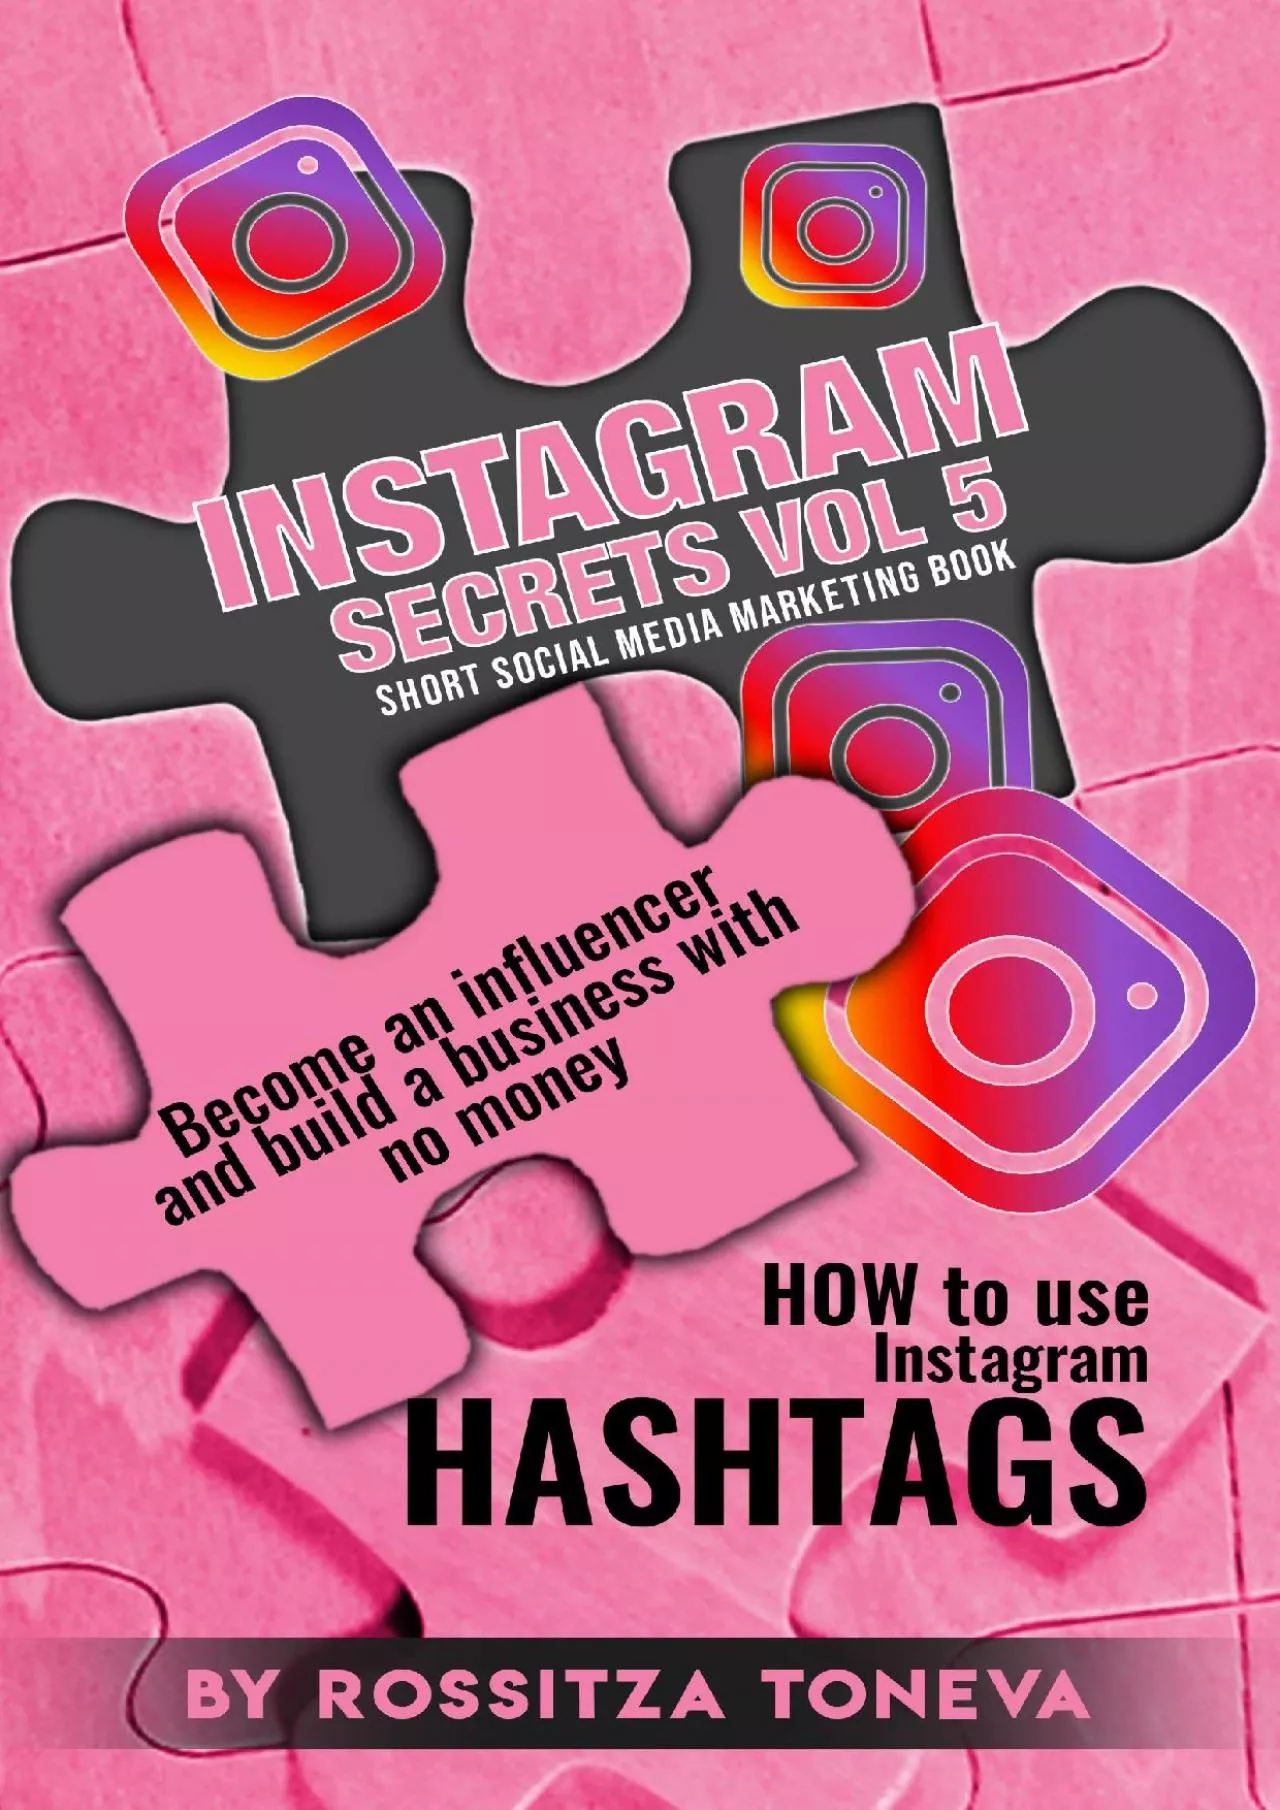 INSTAGRAM SECRETS ( Vol 5 ): HOW to use Instagram HASHTAGS: Become an influencer and build